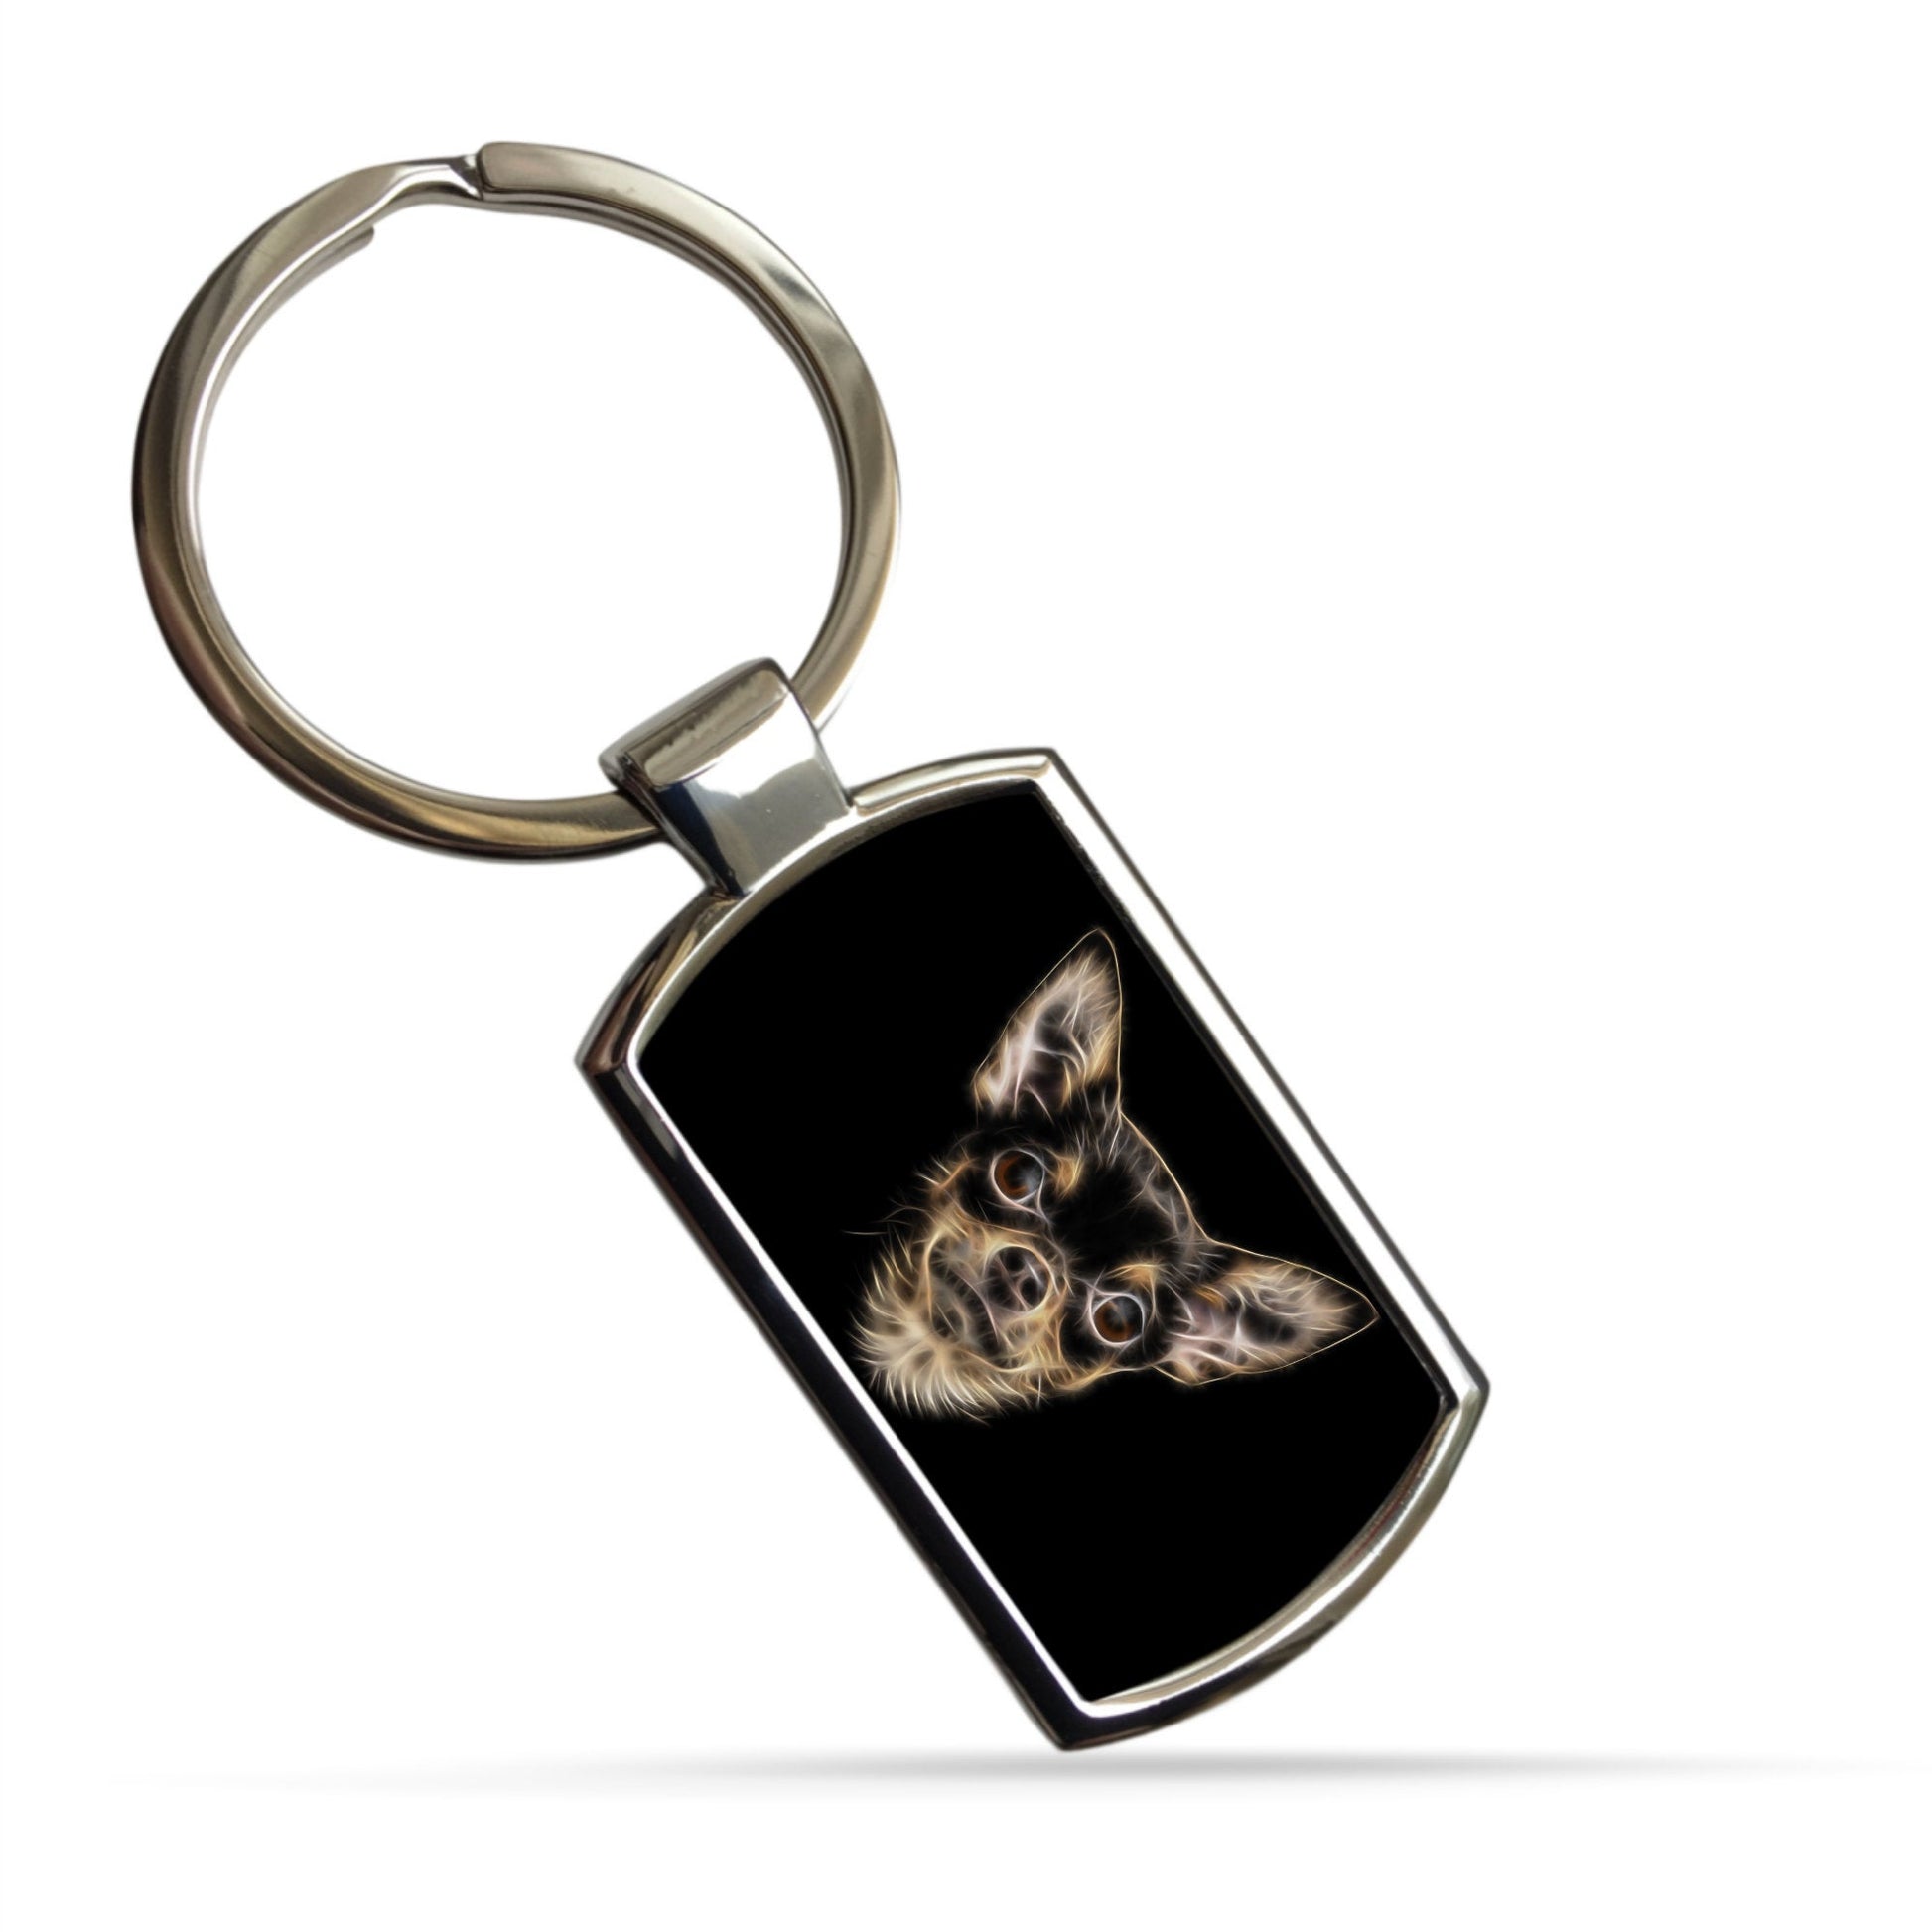 Chihuahua Keychain with Stunning Fractal Art Design. A Perfect Gift for Dog Lover.